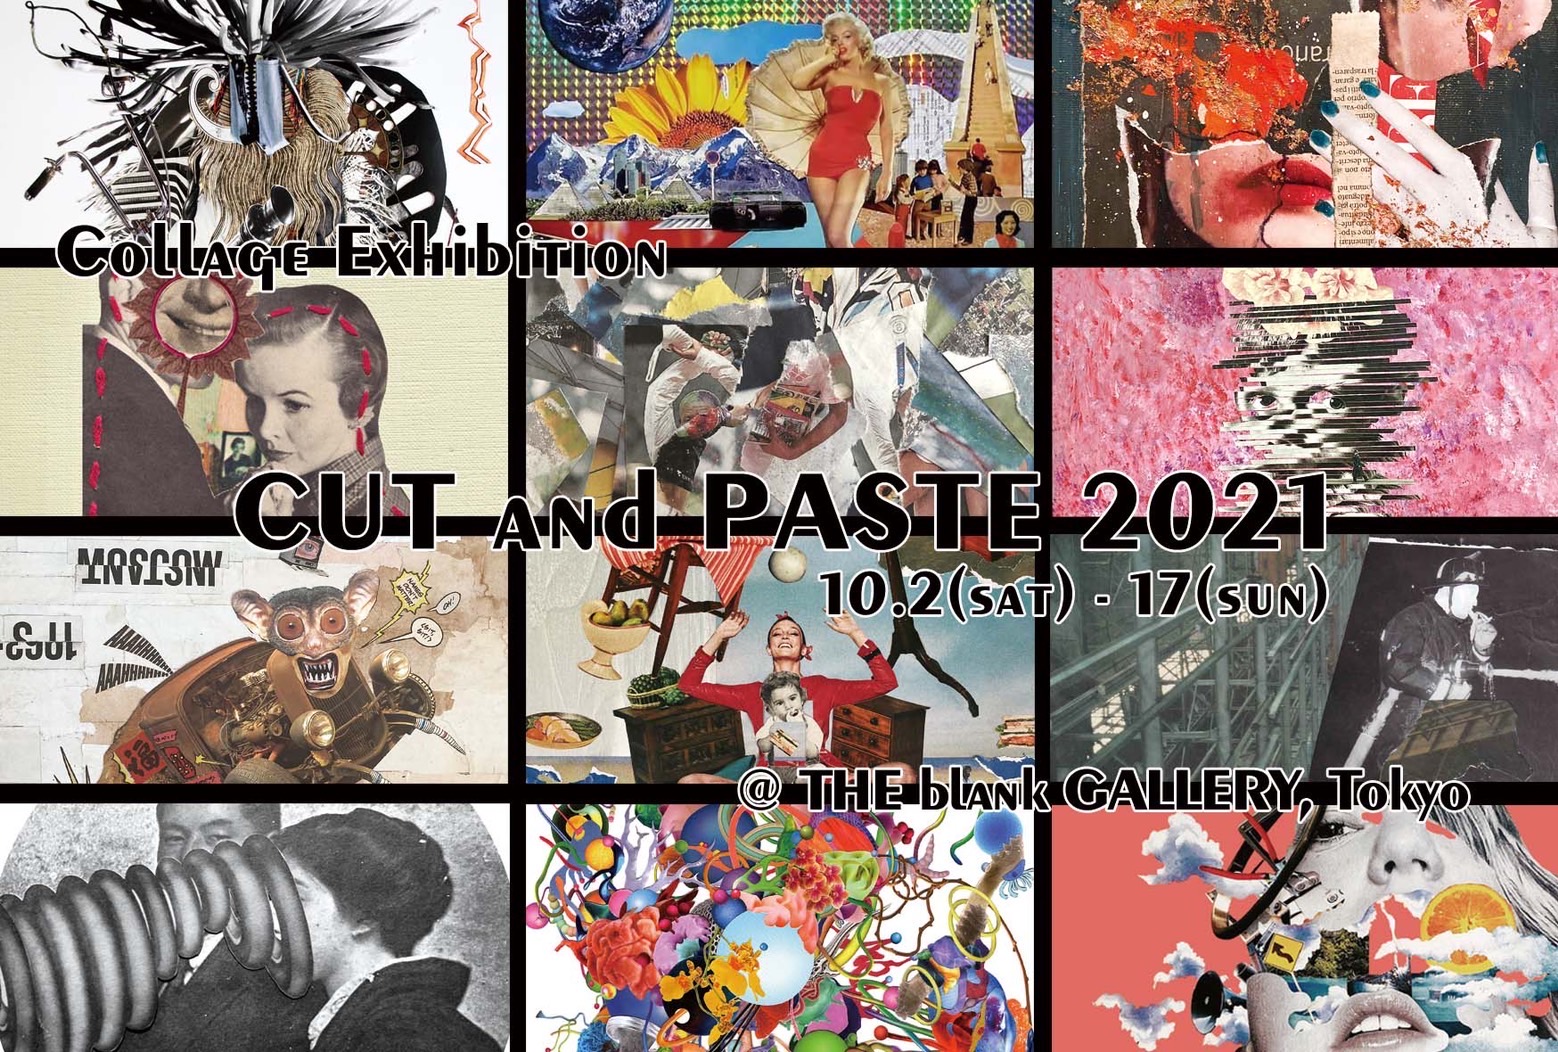 Collage Exhibition: CUT and PASTE 2021